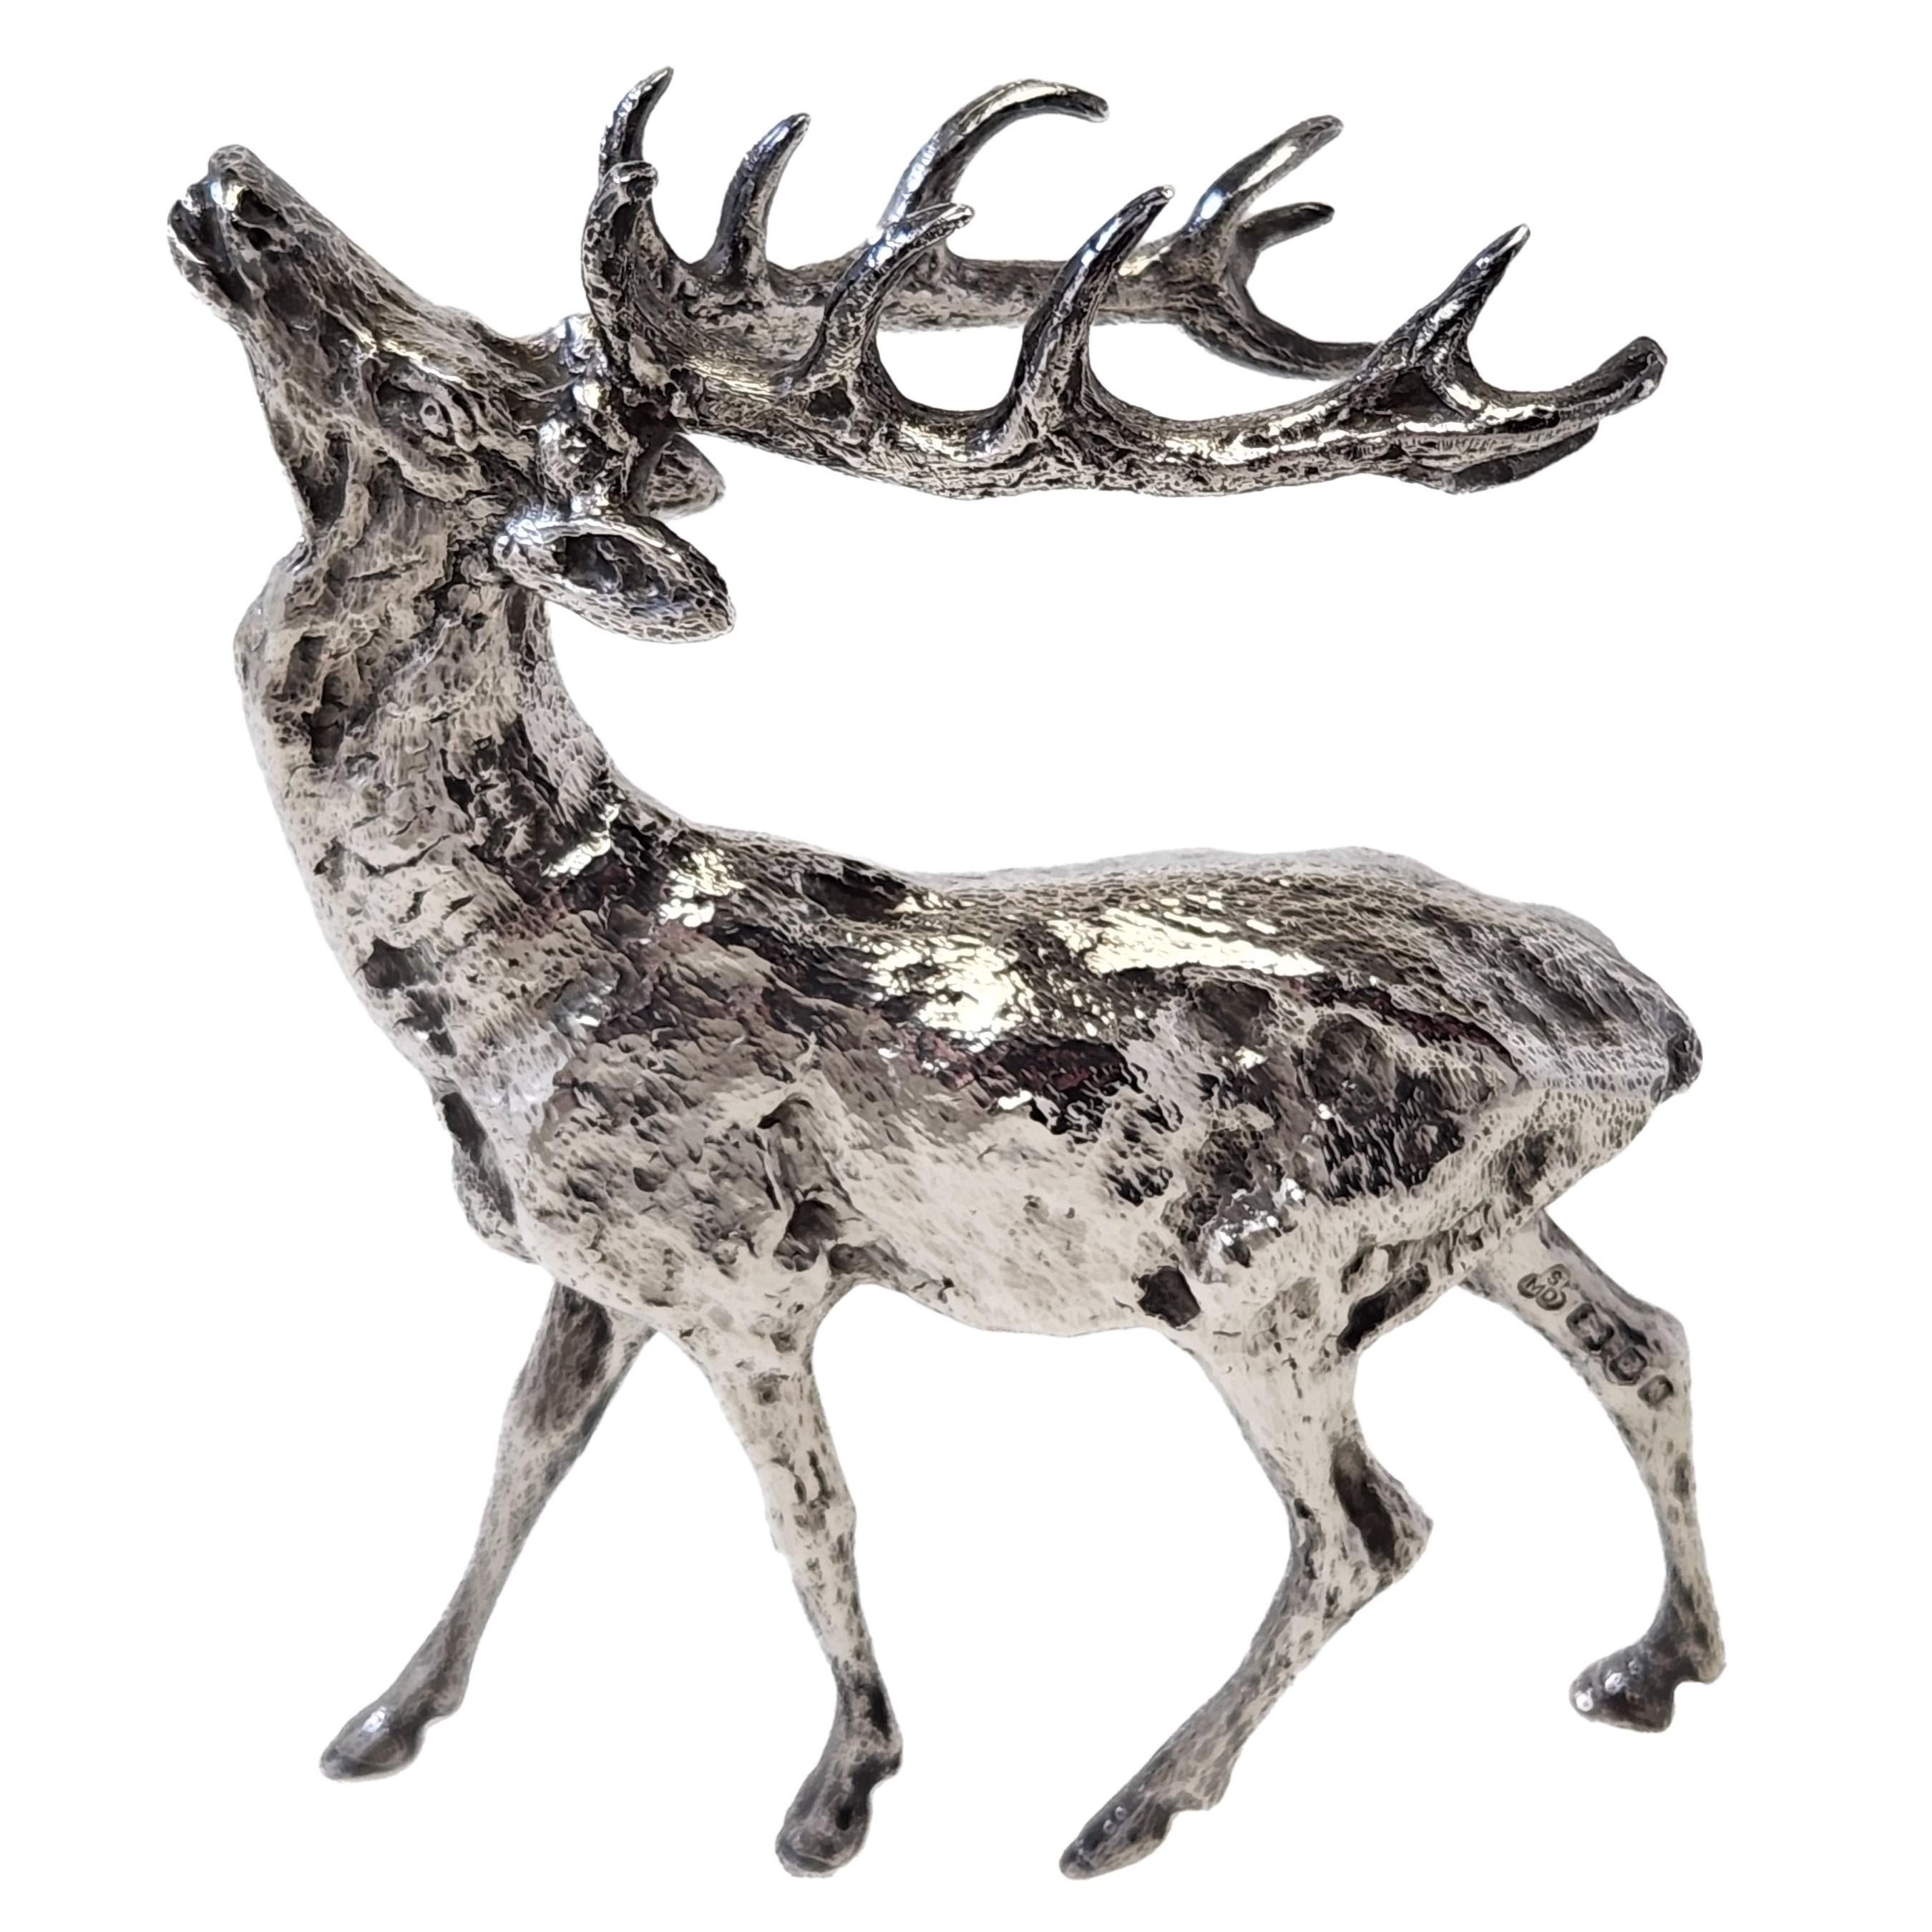 An excellent Solid Silver Model of Stag with impressive horns. This Stag is beautifully modelled and appears in motion. The Model Stag is of heavy weight and good quality.

Made in London in 1974 by SMD Castings.

Approx. Weight - 506g /